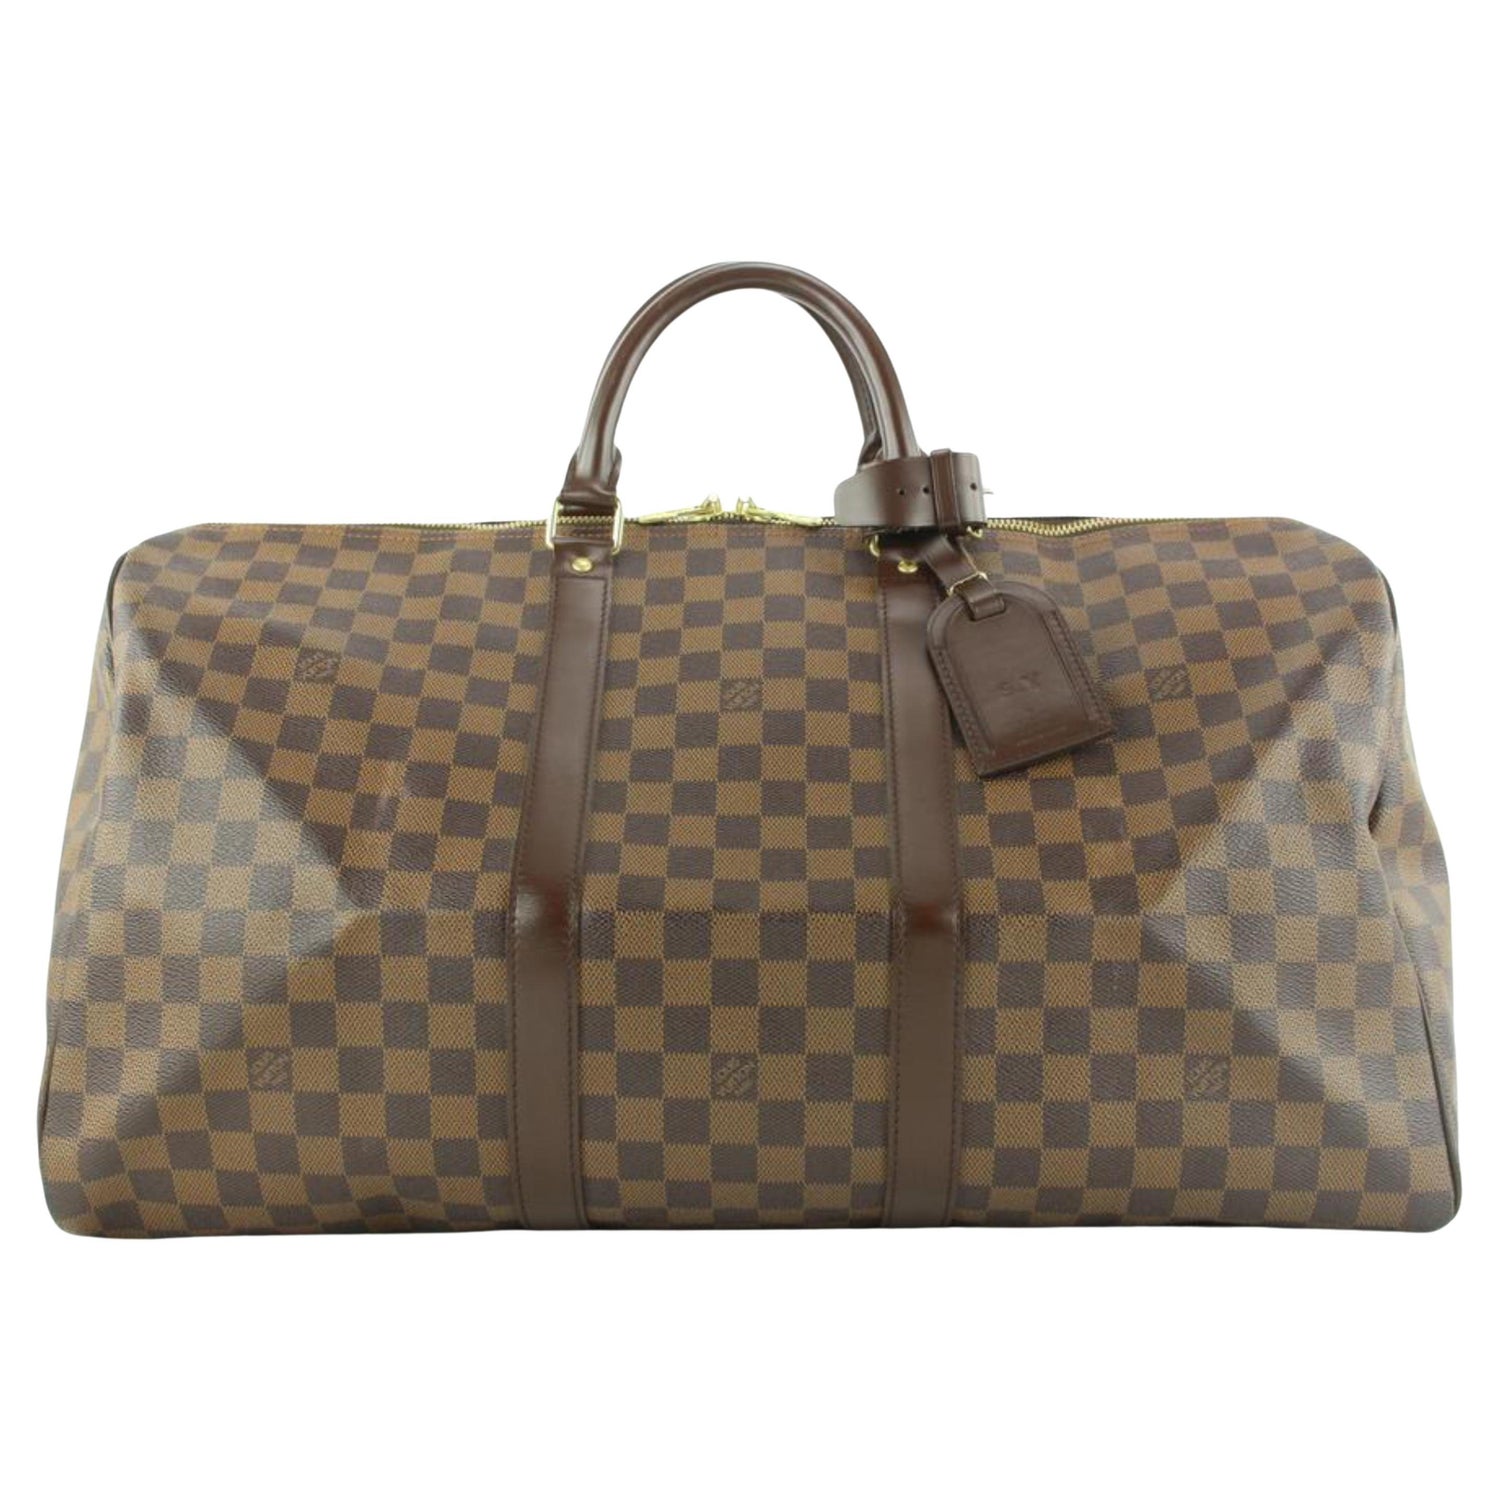 First time LV owner here. My Keepall Bandoulière 55 seems to “pucker” when  I carry it by the strap. Am I being too paranoid about it? Is it normal?  It's not loaded